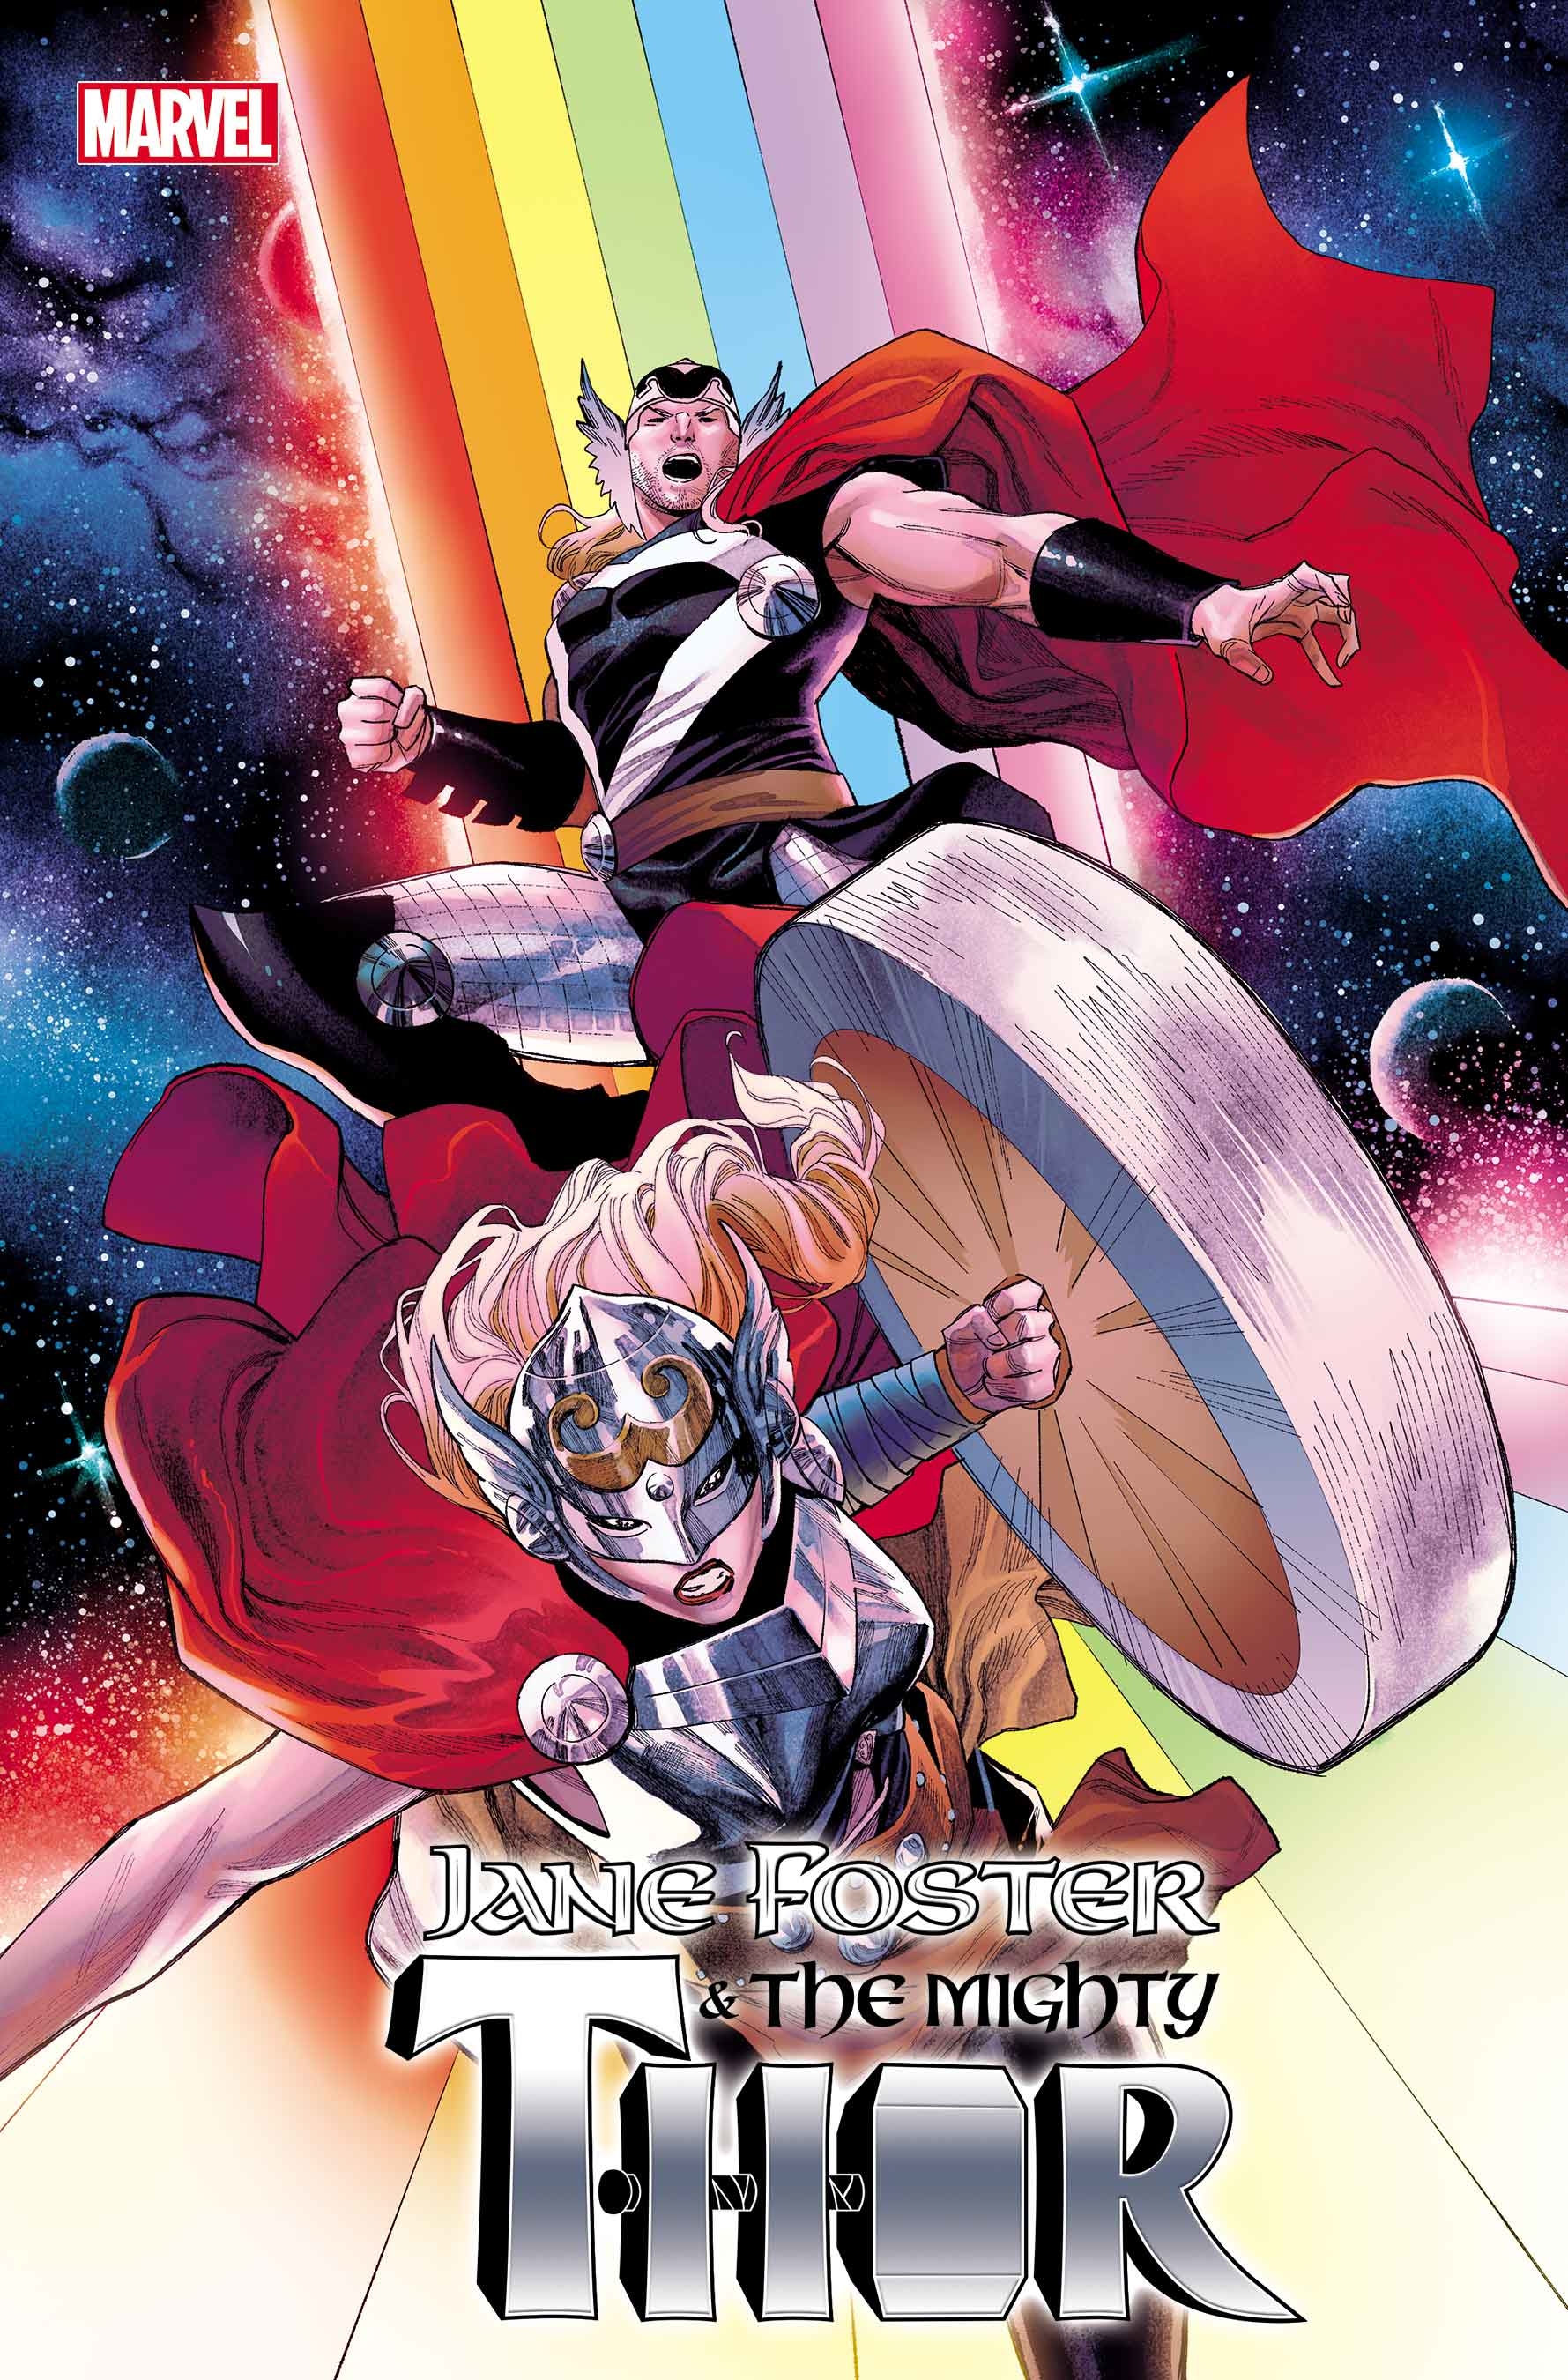 Jane Foster & The Mighty Thor #1 1 for 25 Incentive Coccolo Variant (Of 5)